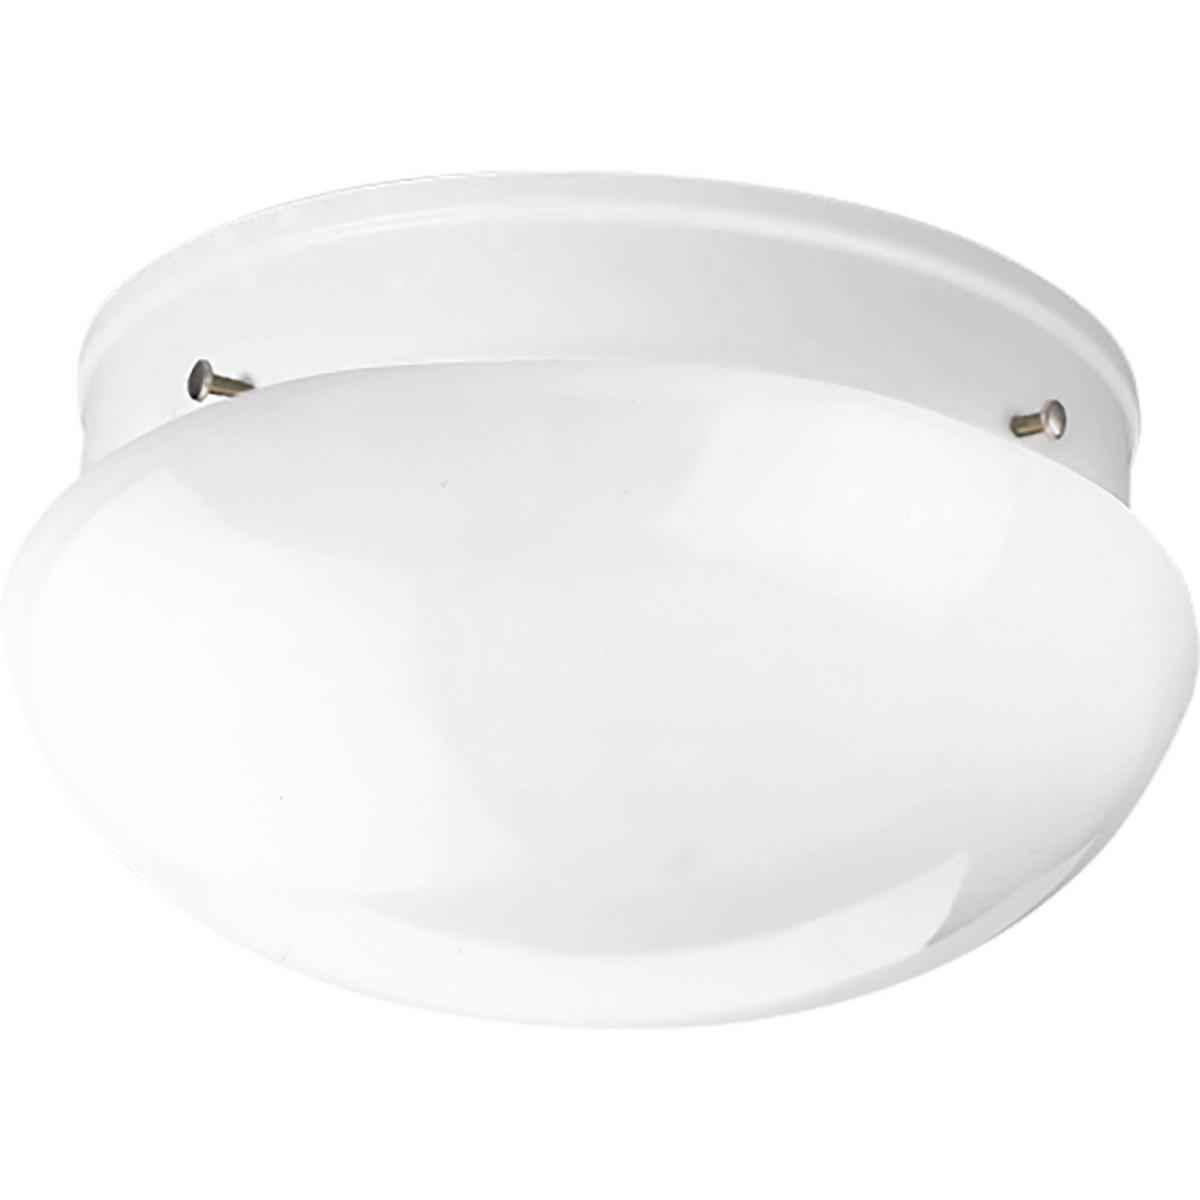 Hubbell P3410-30 A traditional two-light close-to-ceiling fixture featuring a White glass bowl and a White finish. The fixture is ideal in a bathroom setting or hall/foyer.  ; White finish. ; White glass bowl. ; Steel construction. ; Requires two (2) 60-watt bulbs (not in